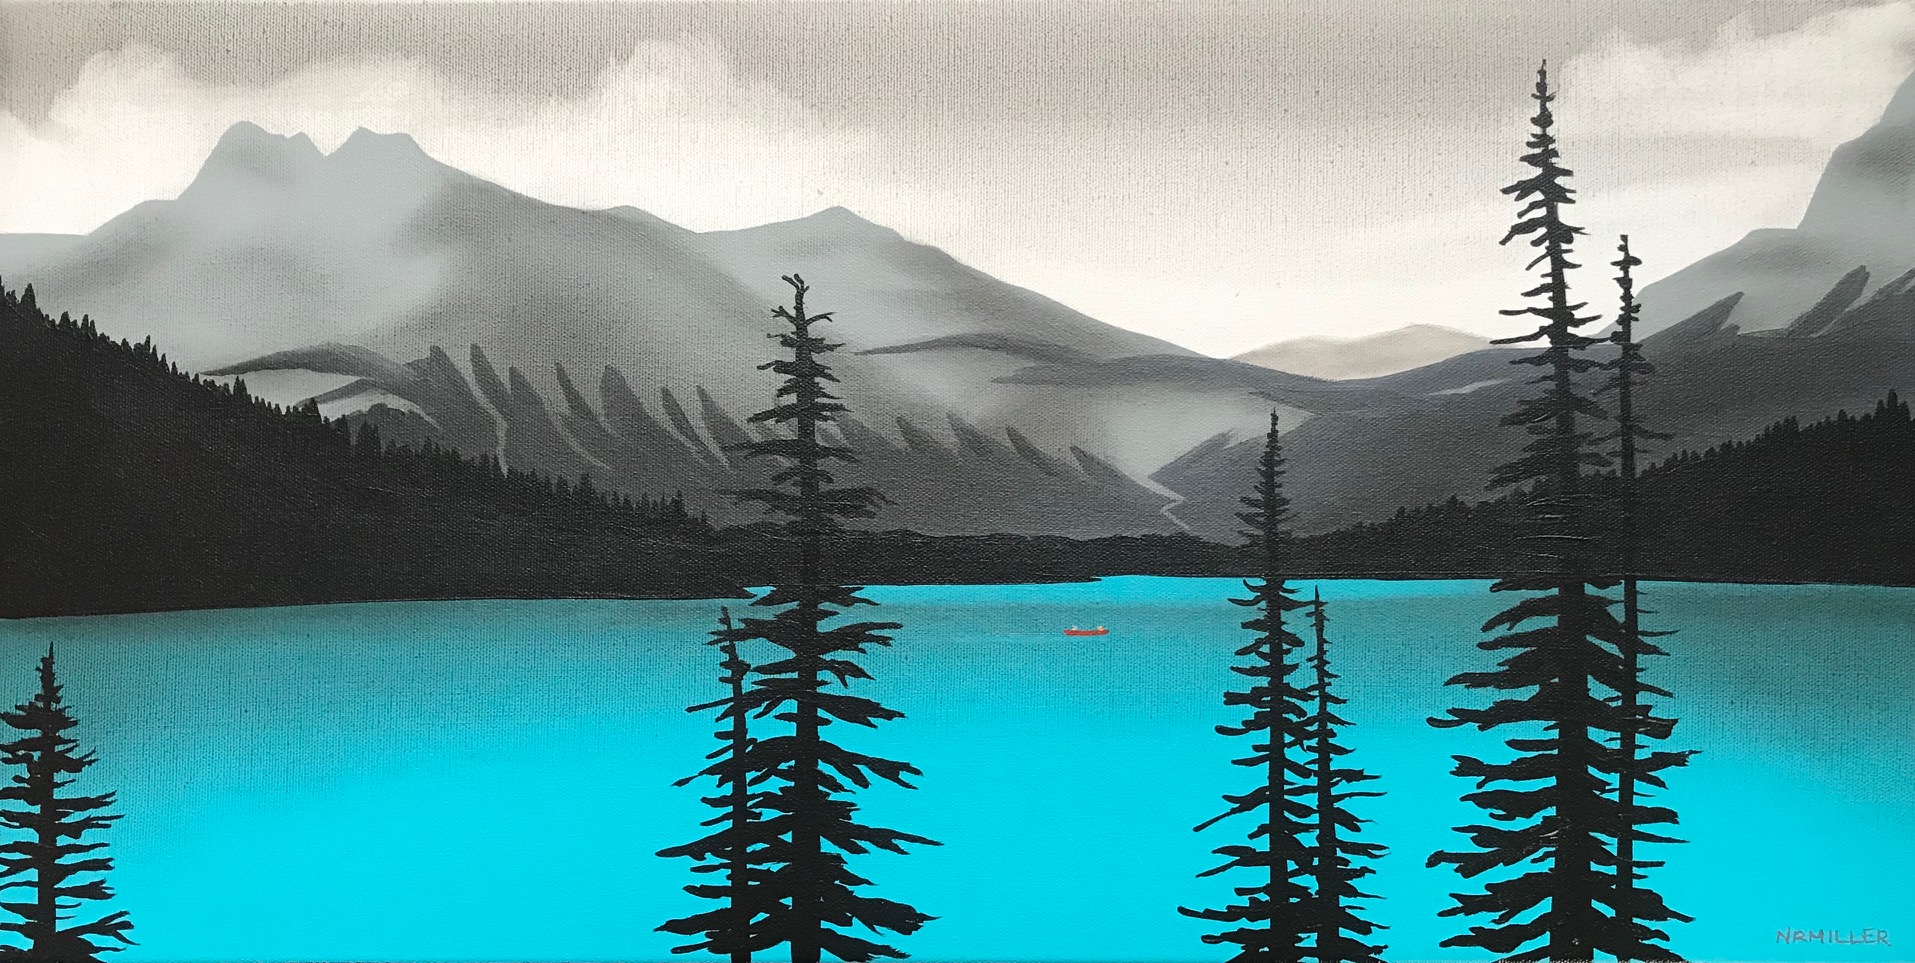 The Allure of Emerald Lake, mixed media painting by Natasha Miller | Effusion Art Gallery + Cast Glass Studio, Invermere BC